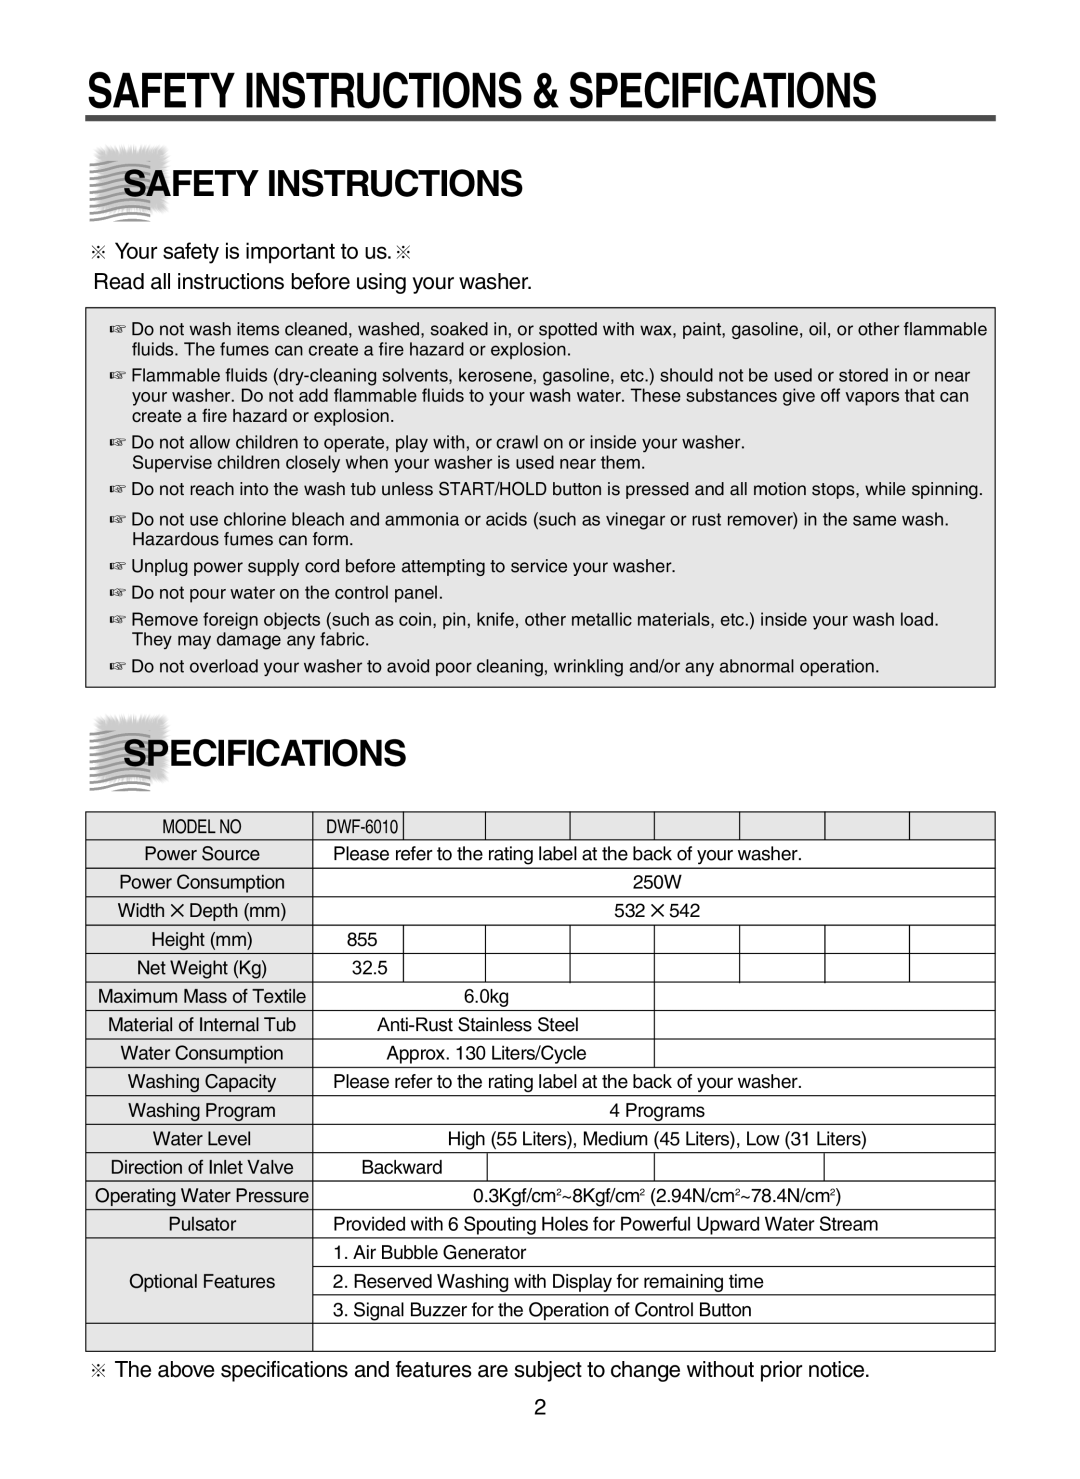 Daewoo DWF-6010 instruction manual Safety Instructions & Specifications 